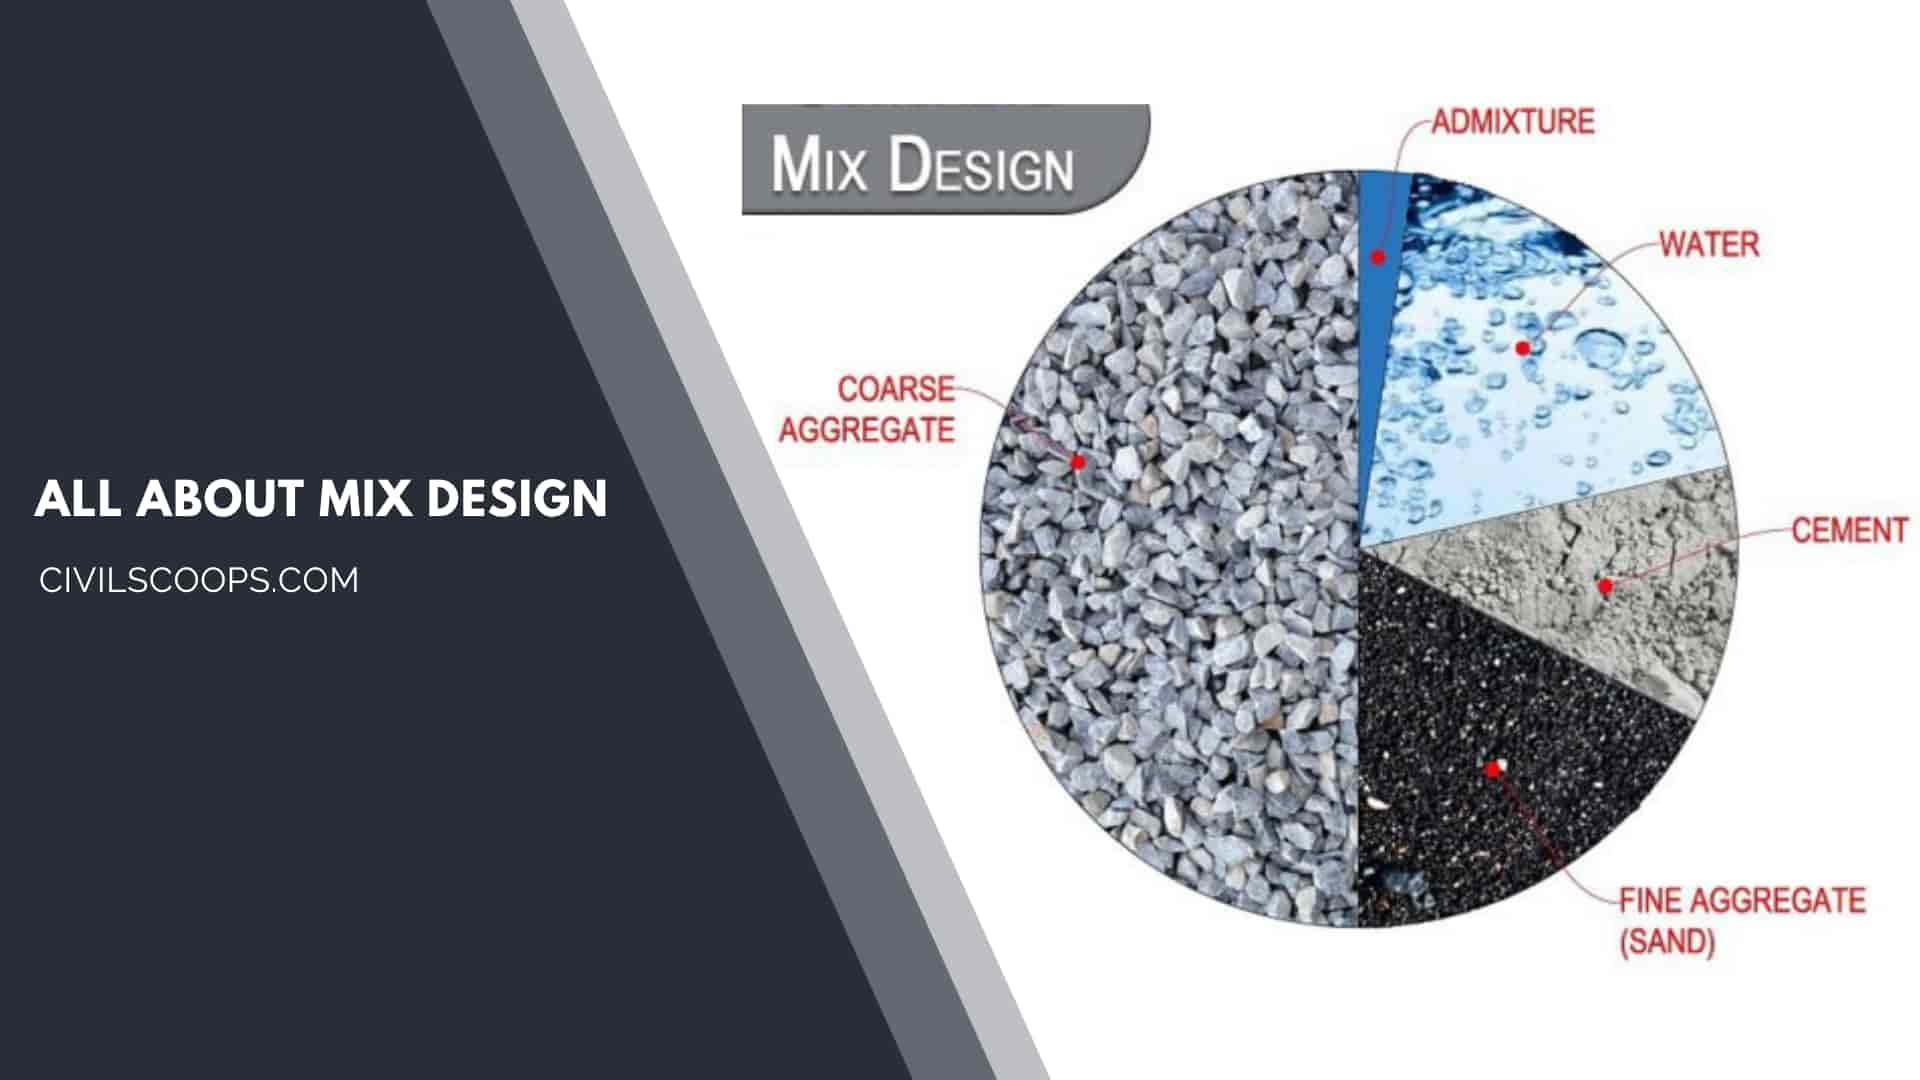 All About Mix Design